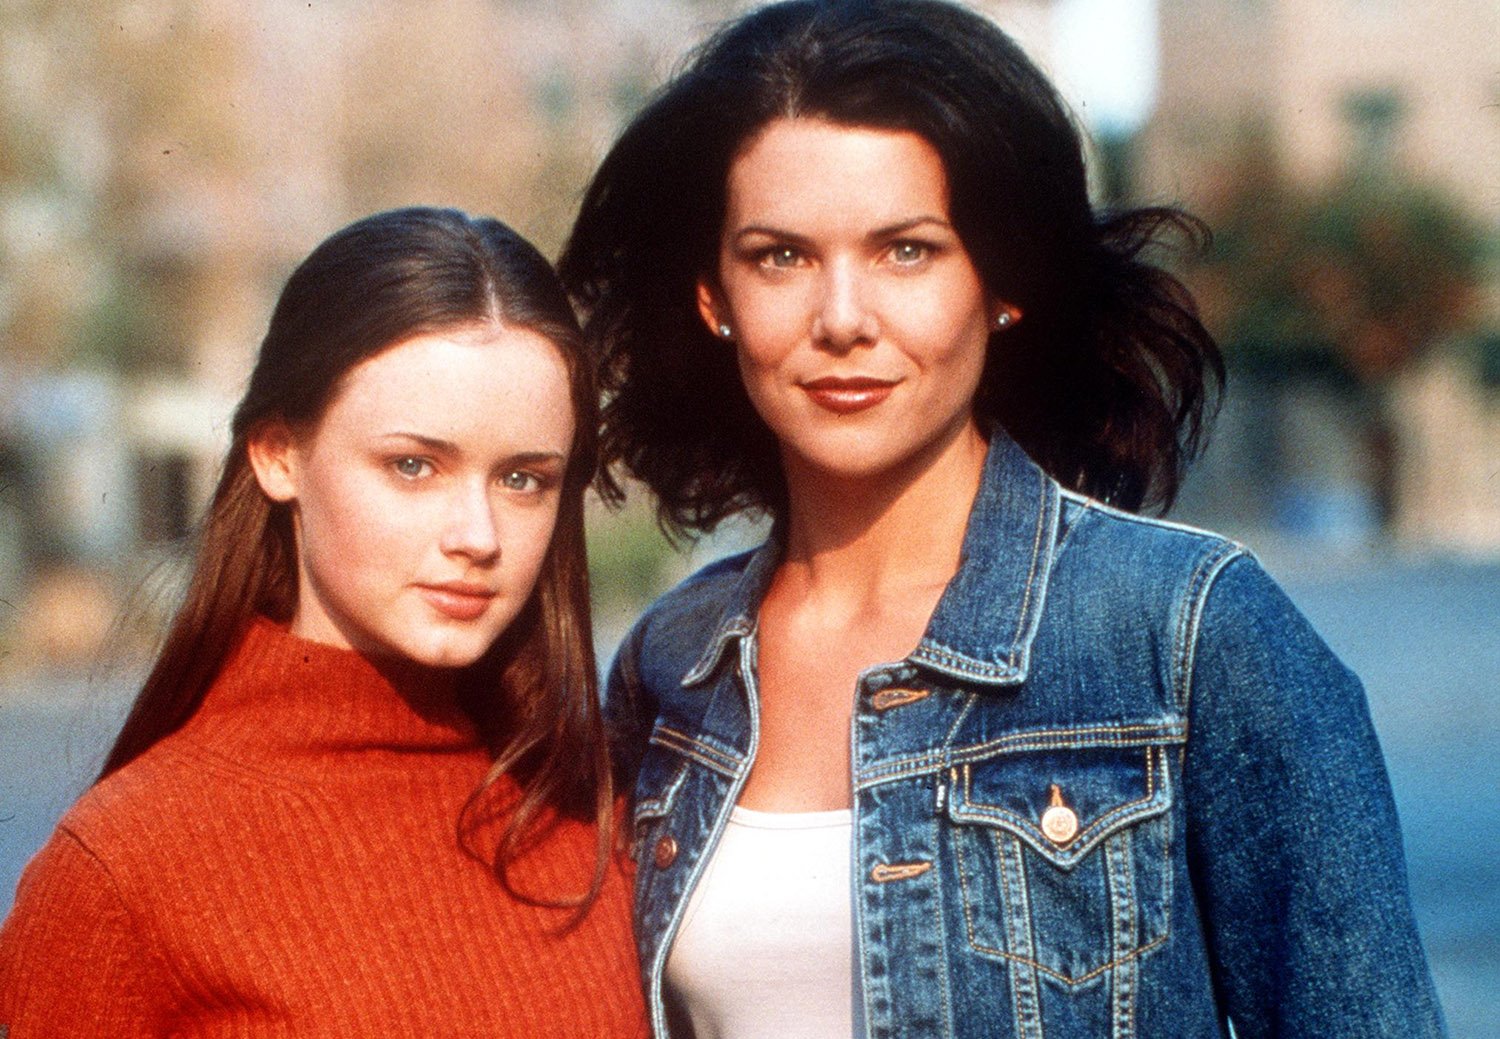 Gilmore Girls book series: Alexis Bledel as Rory Gilmore in an orange sweater and Lauren Graham as Lorelai Gilmore in a denim jacket in a promo image for Gilmore Girls